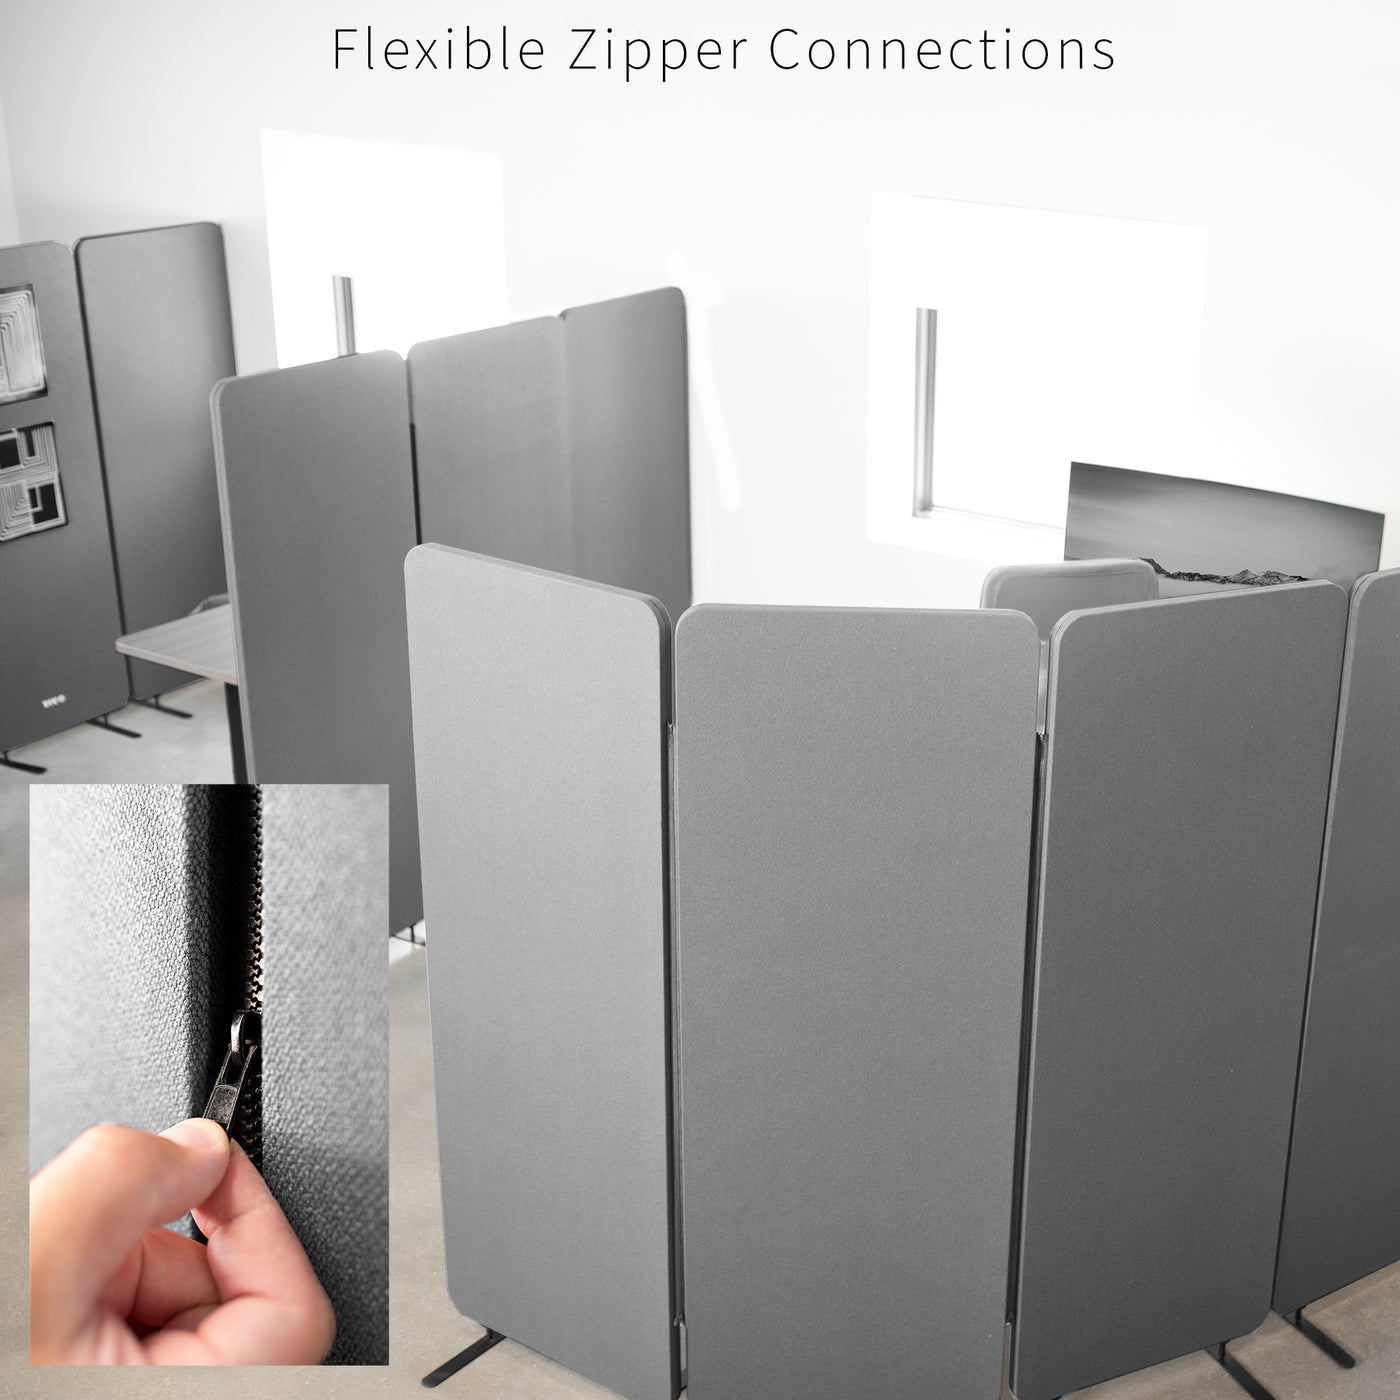 3-Panel Gray Freestanding Room Divider provides a convenient partition and workspace privacy.